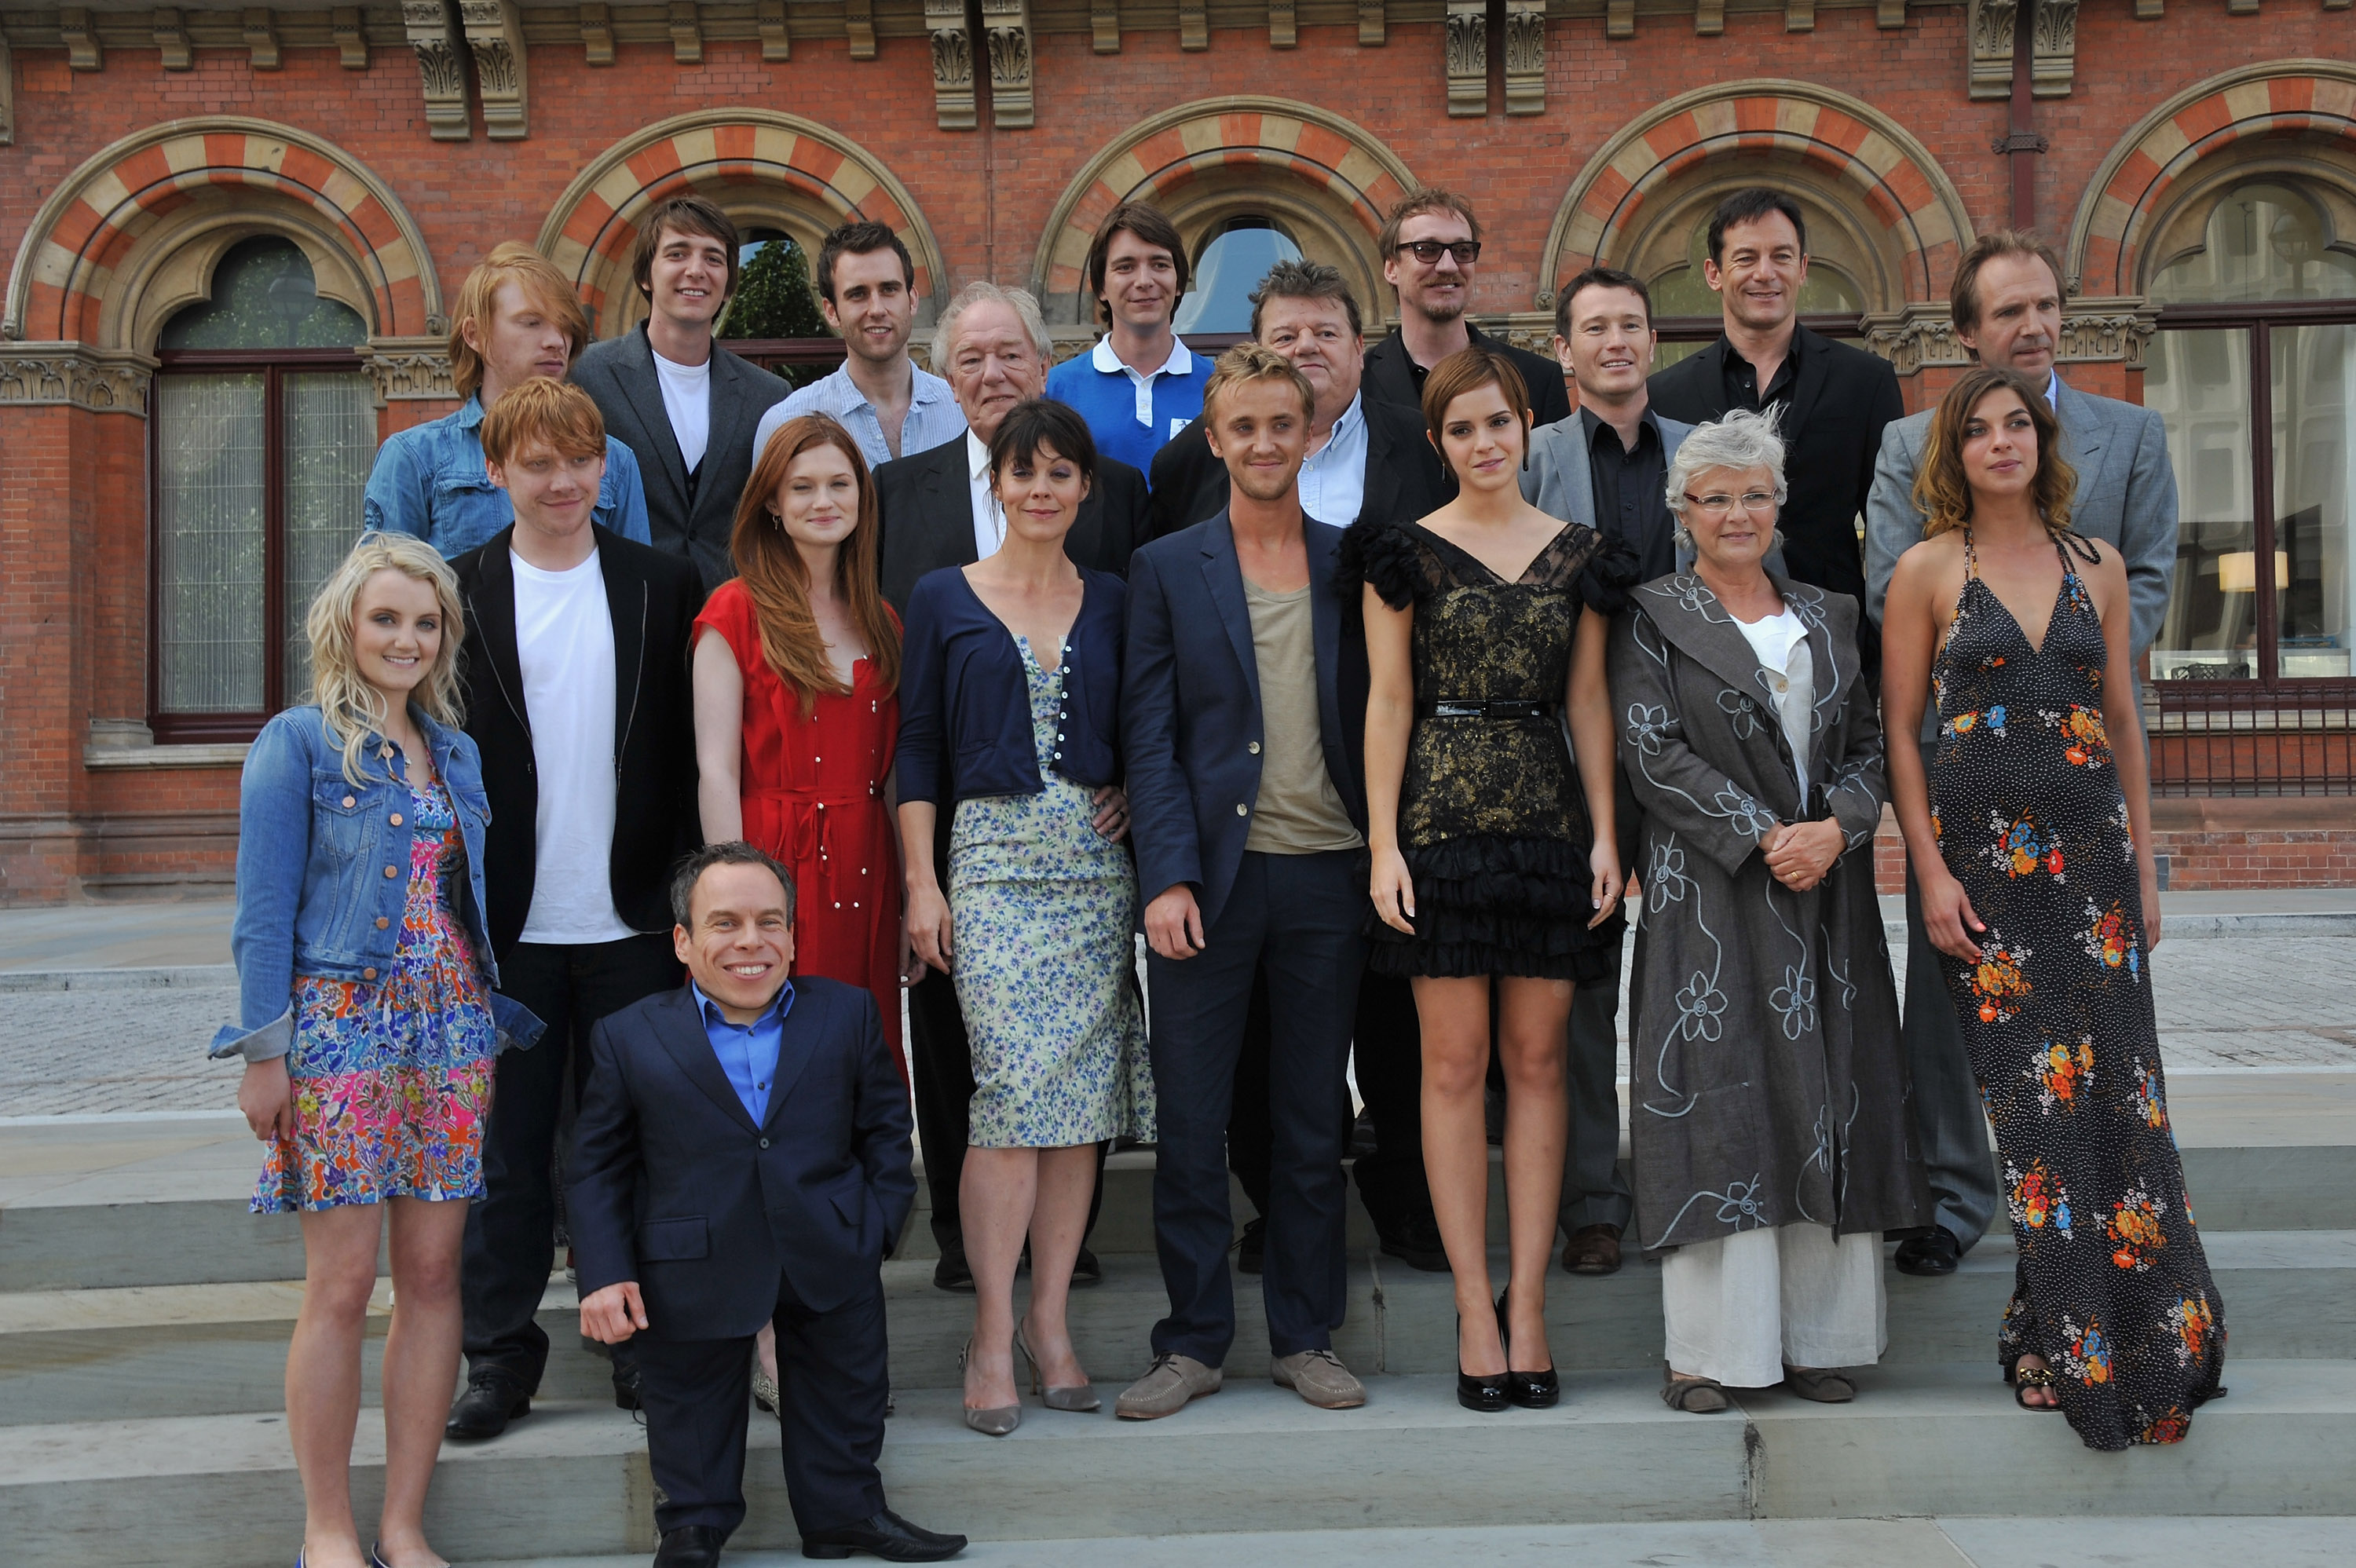 Sir Michael Gambon with the cast of "Harry Potter and the Deathly Hallows: Part 2" in London, England on July 6, 2011 | Source: Getty Images